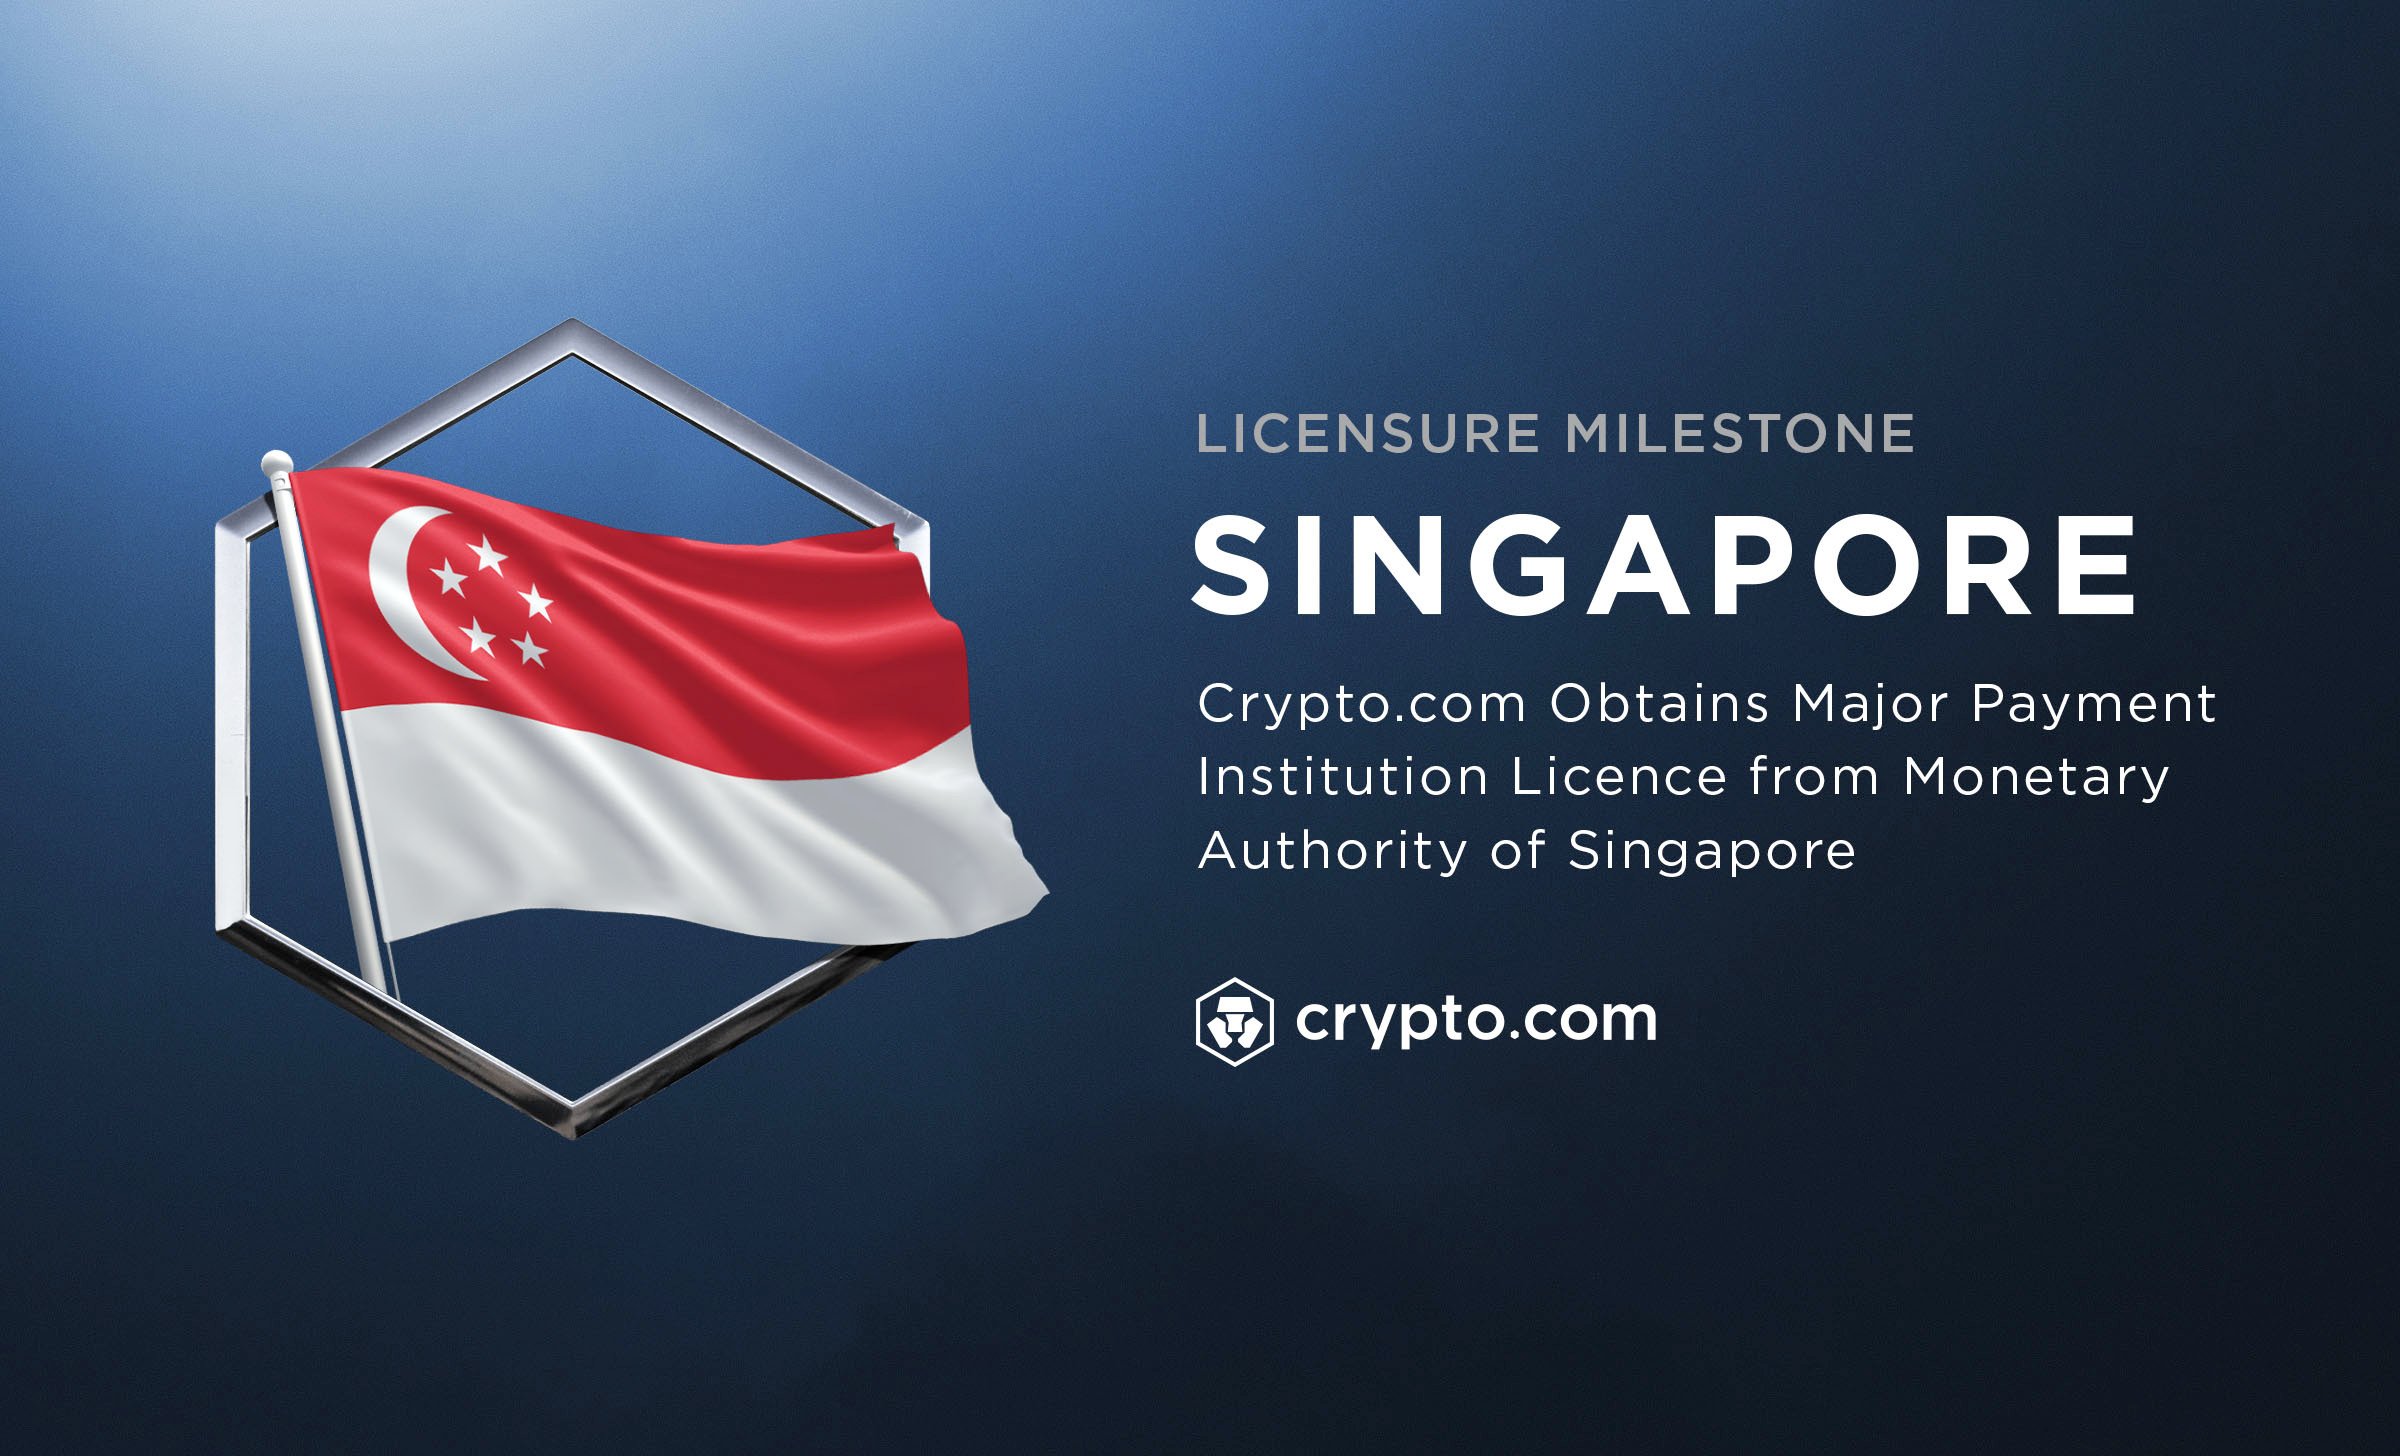 Singapore to regulate crypto like cigarettes, gambling • The Register